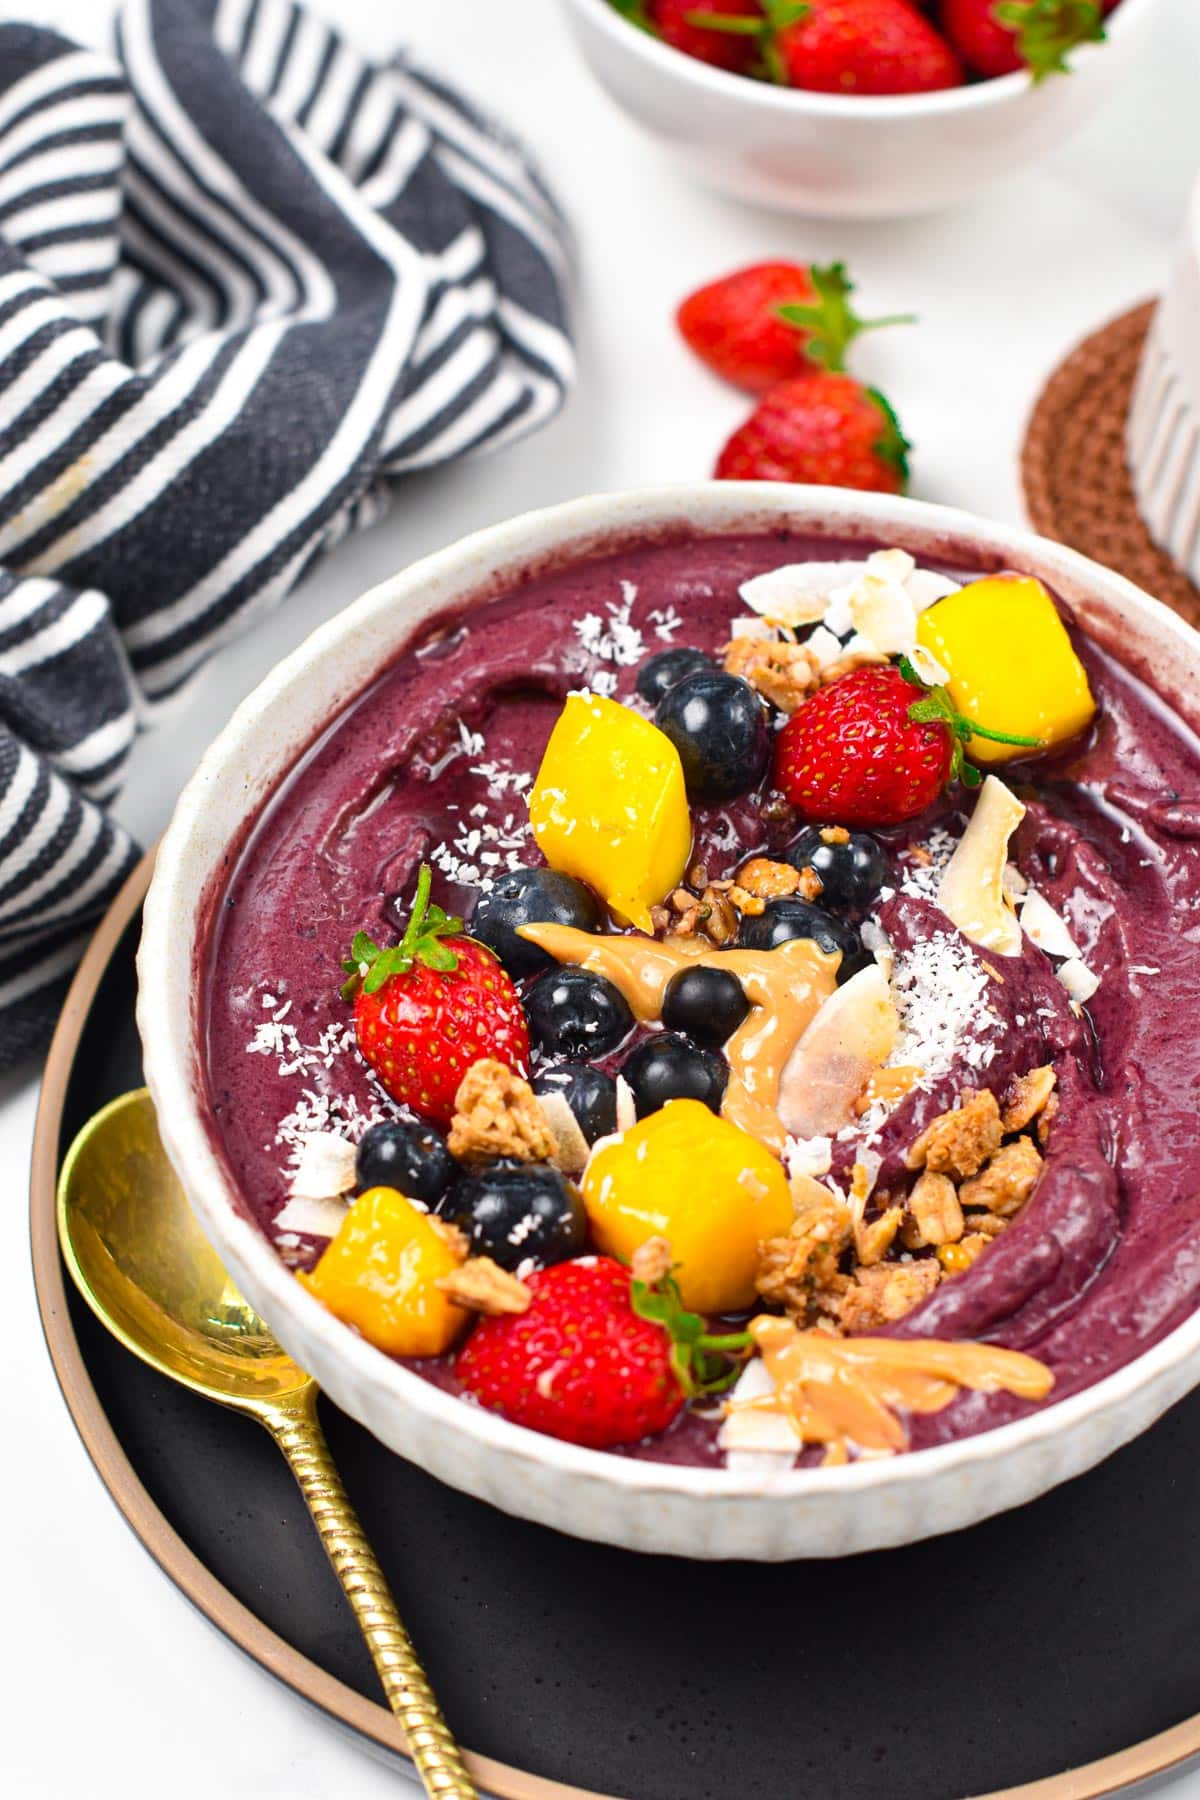 This Acai Bowl recipe is a creamy refreshing smoothie bowl packed with anti-oxidants and vitamin C. Plus, it takes barely 5 minutes to prepare this easy healthy breakfast and it's also naturally vegan and gluten-free.